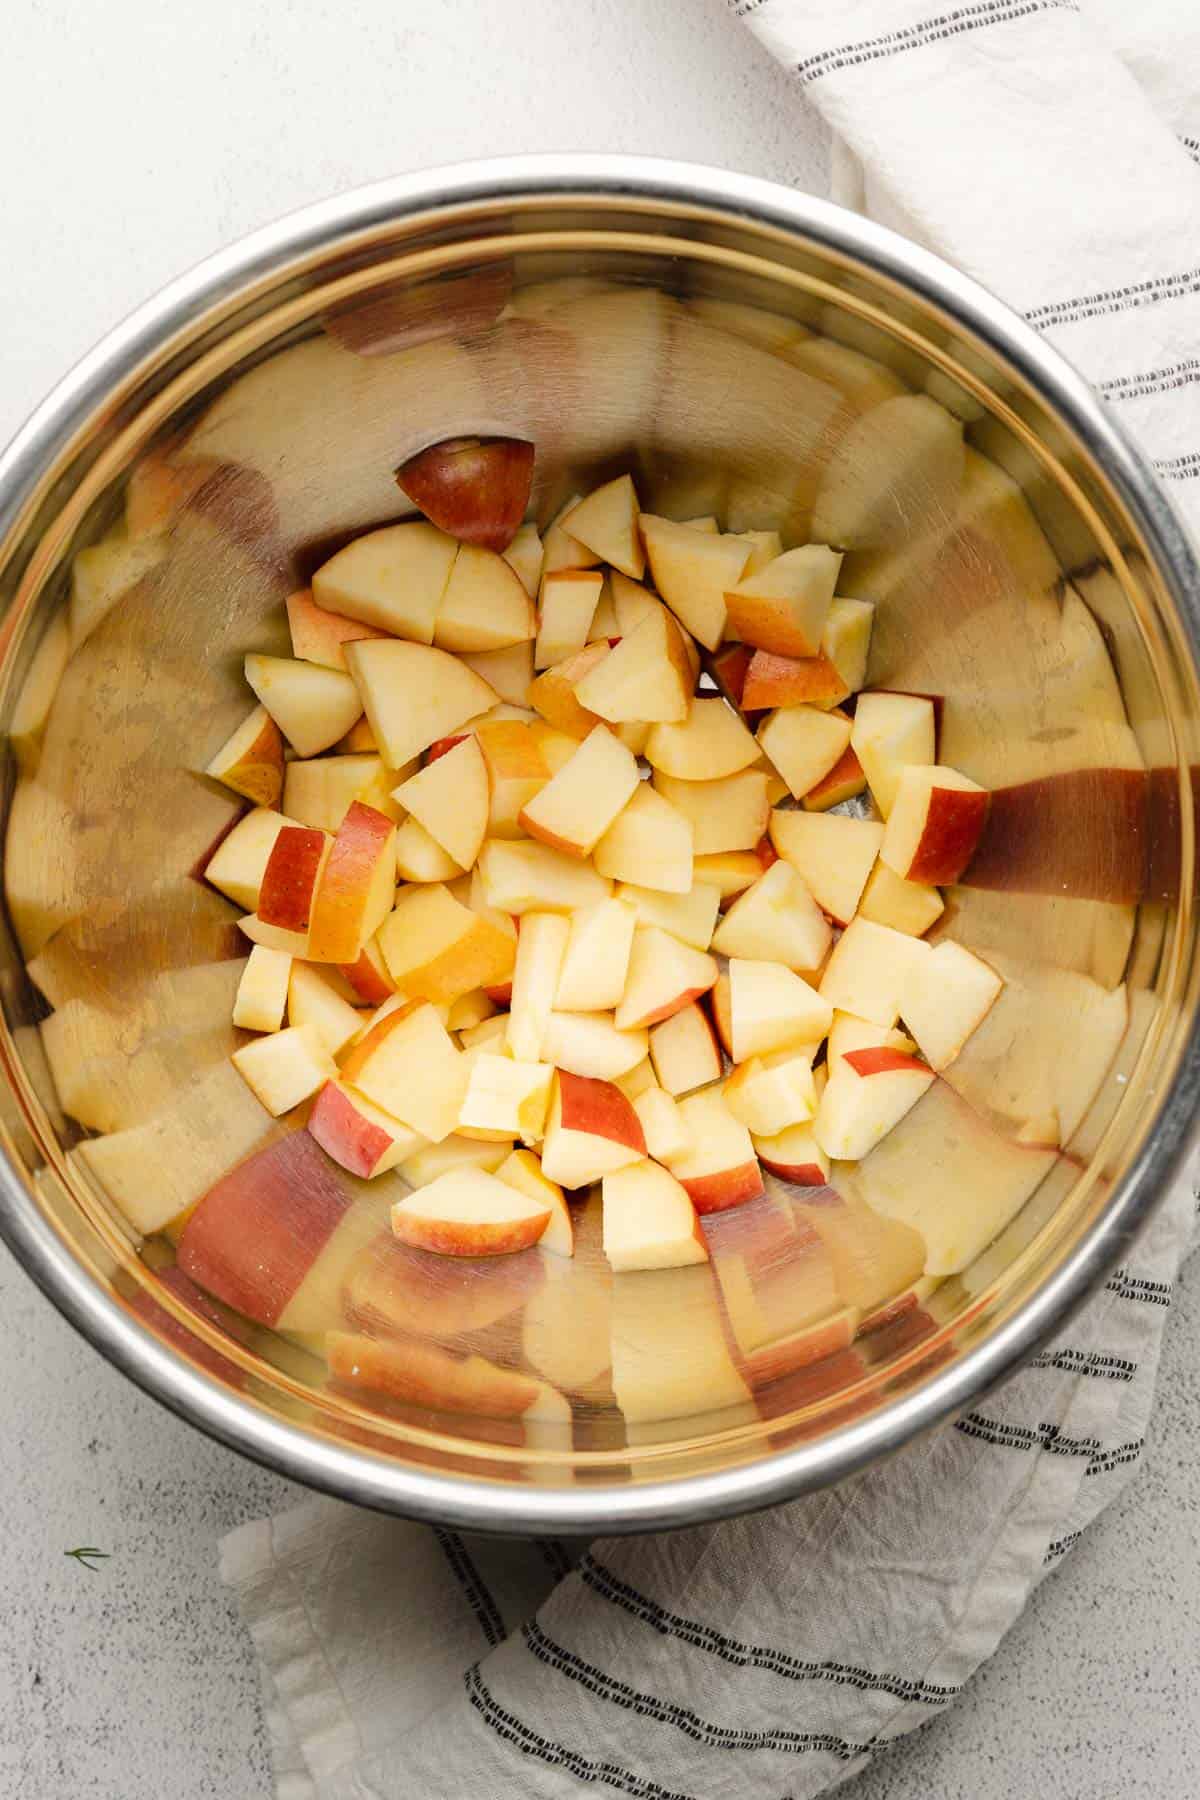 apples cut up in a metal bowl